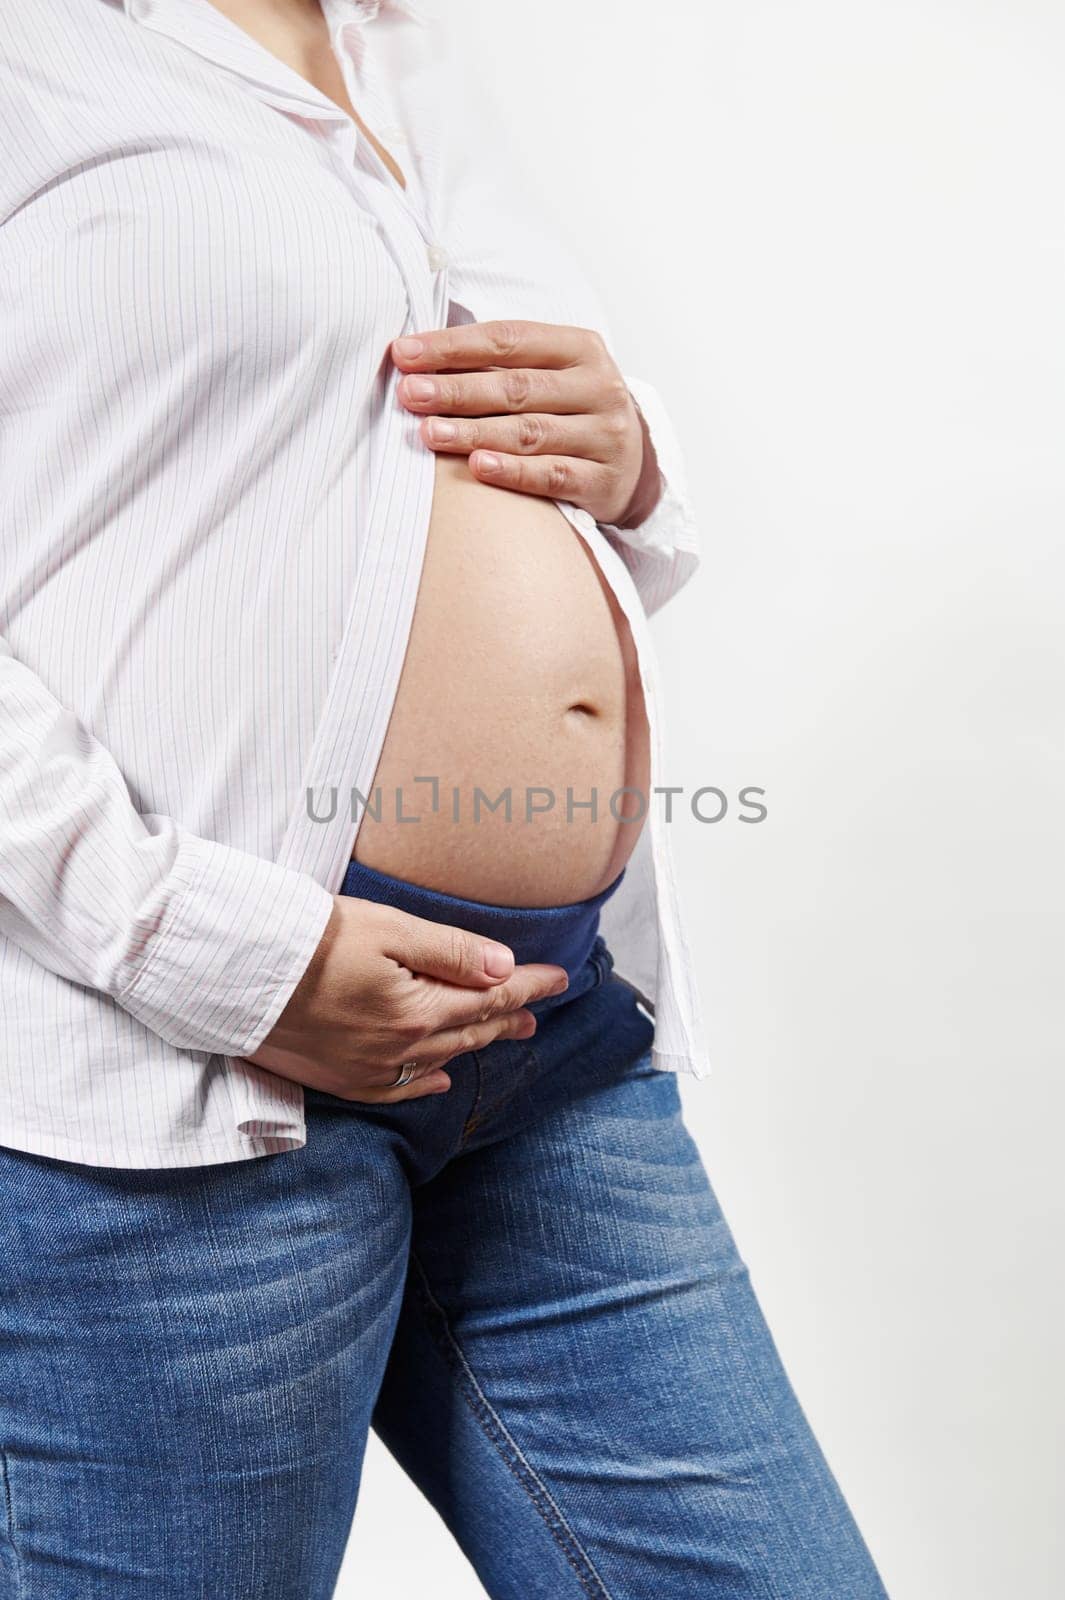 Midsection of pregnant woman holding hands on her bare belly, isolated on white background. Pregnancy 28 weeks by artgf